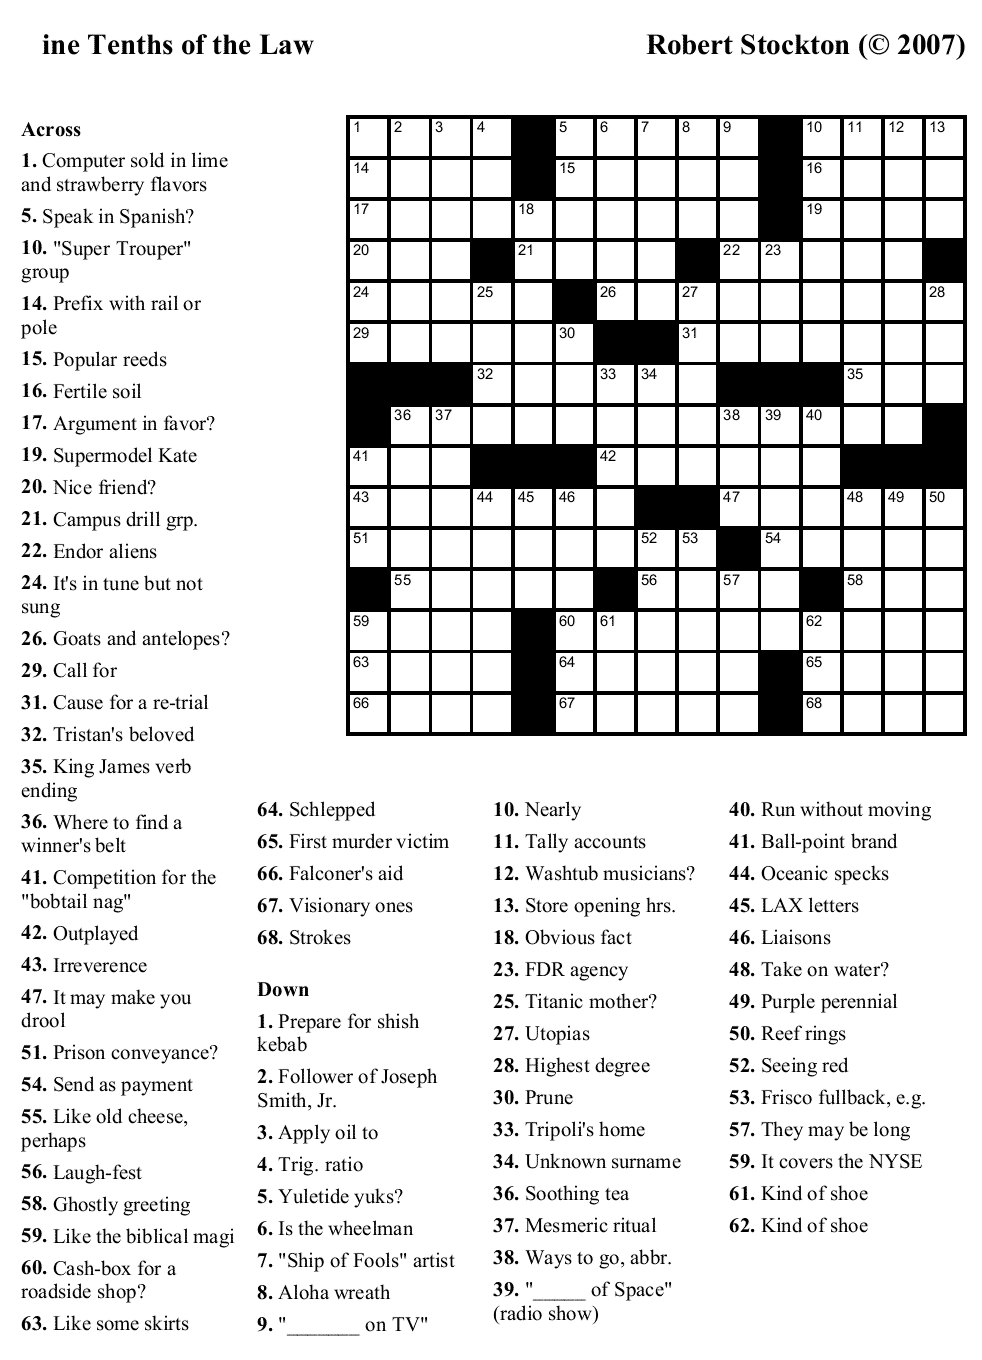 Crossword Puzzles Printable - Yahoo Image Search Results | Crossword - Printable Crossword Puzzles Large